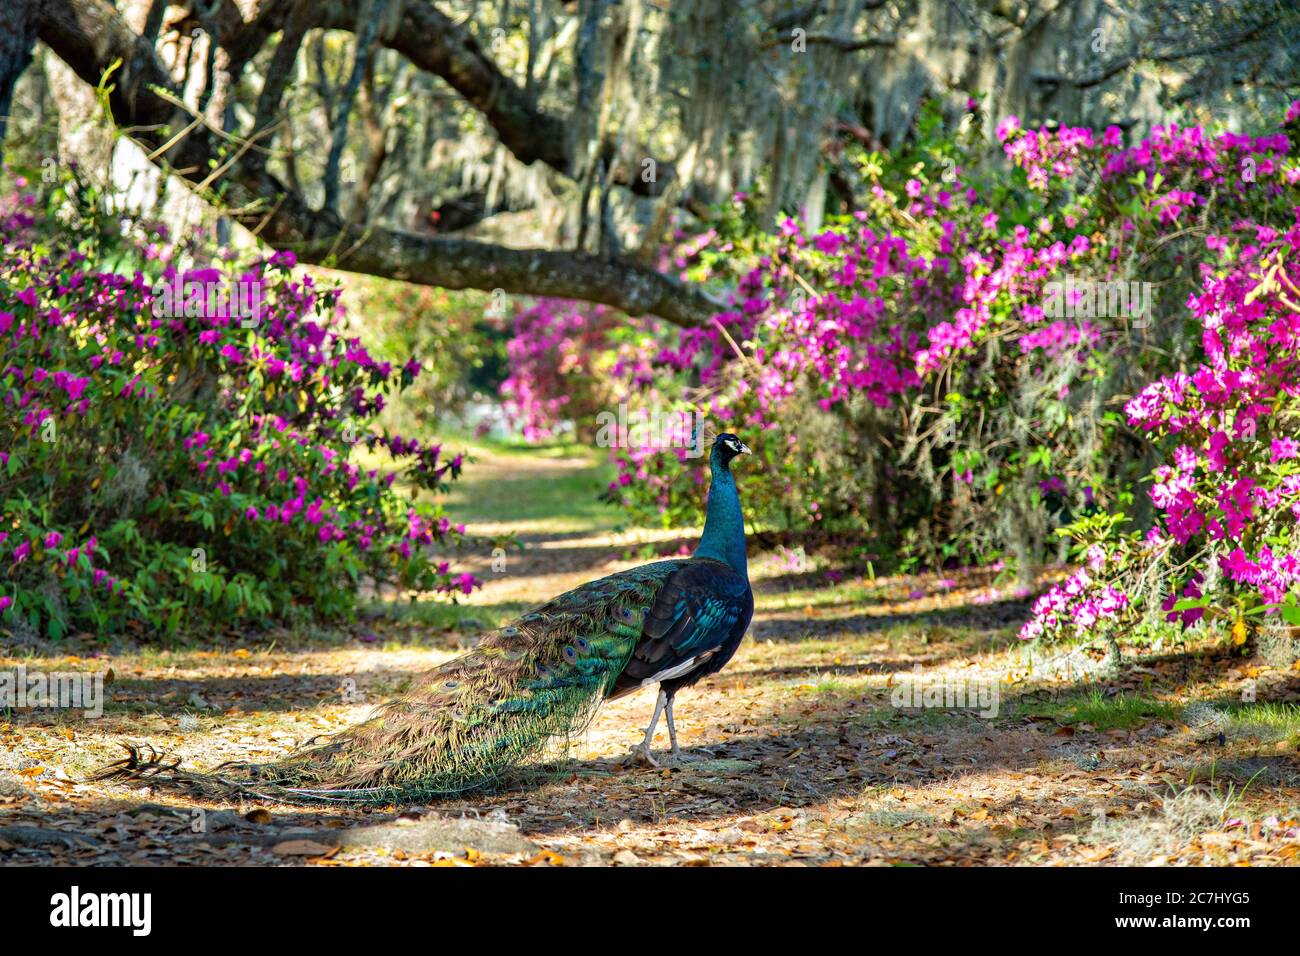 A male Indian peacock perches on a garden fence in spring at Magnolia Plantation in Charleston, South Carolina. The plantation and gardens were built in 1676 by the Drayton Family and remains under the control of the Drayton family after 15 generations. Stock Photo